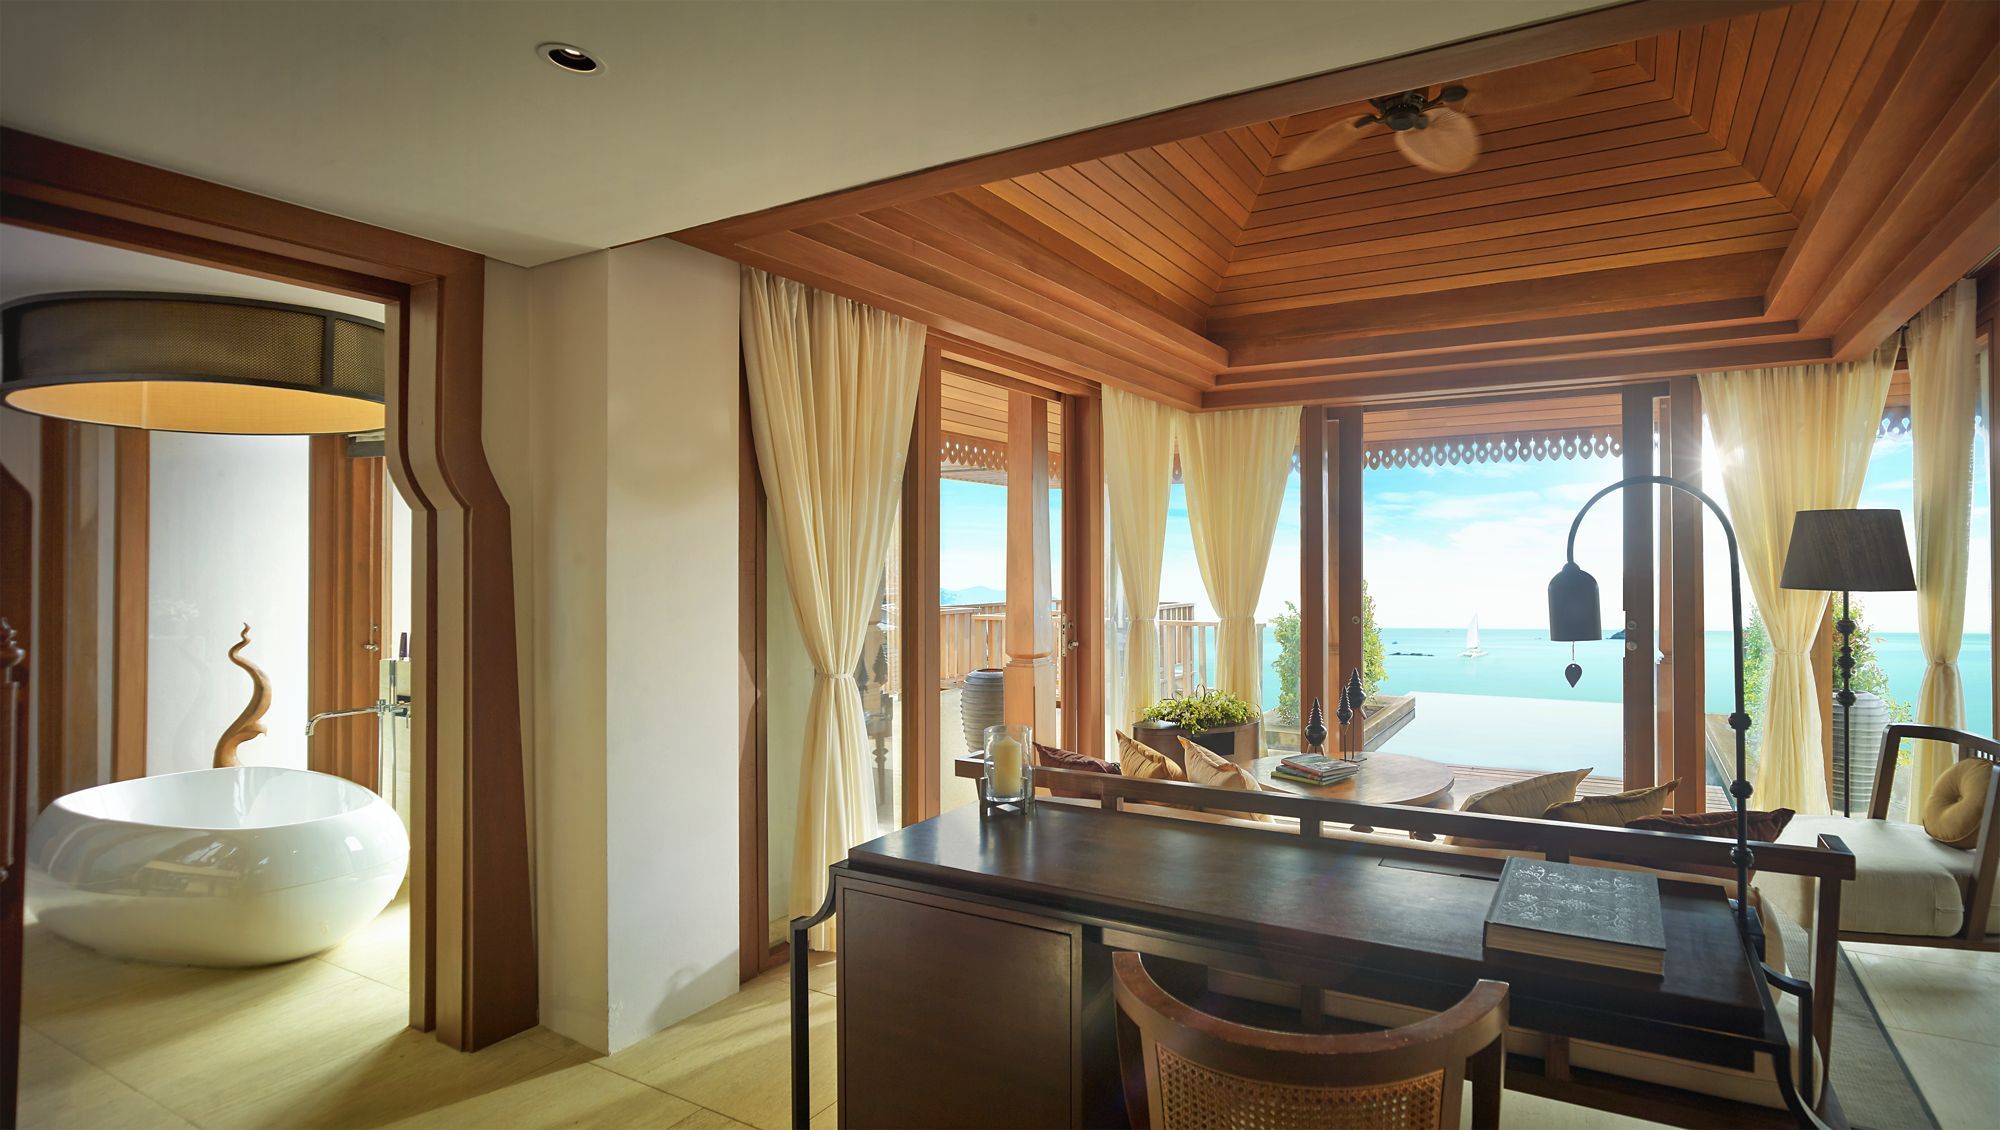 The Ritz-Carlton, Koh Samui is now ready for your next island getaway